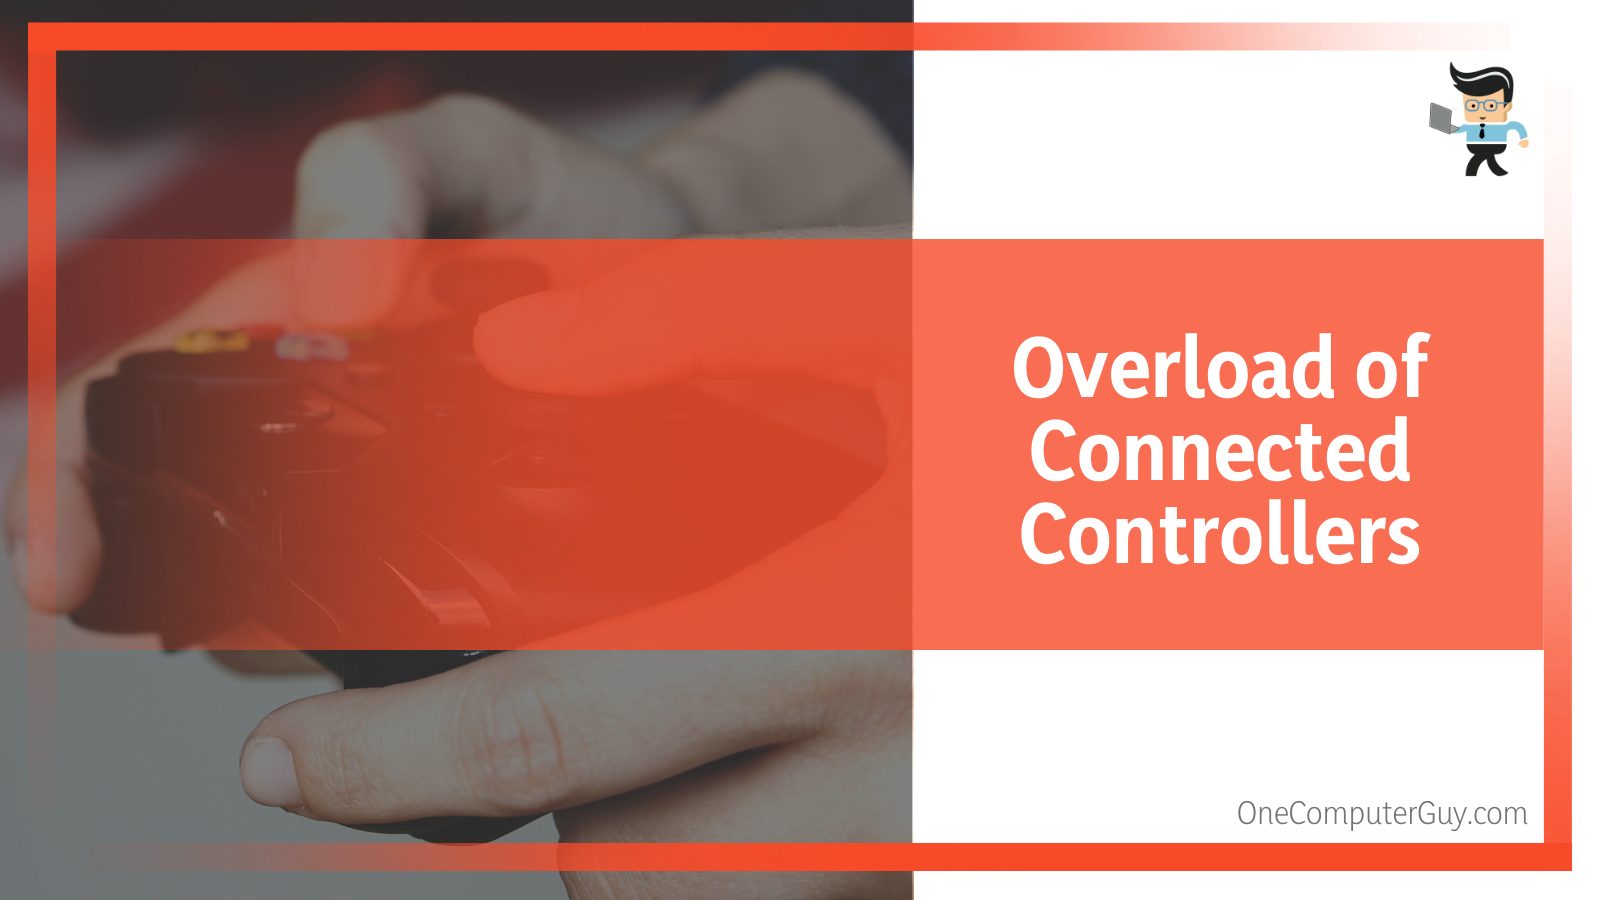 Overload of Connected Controllers